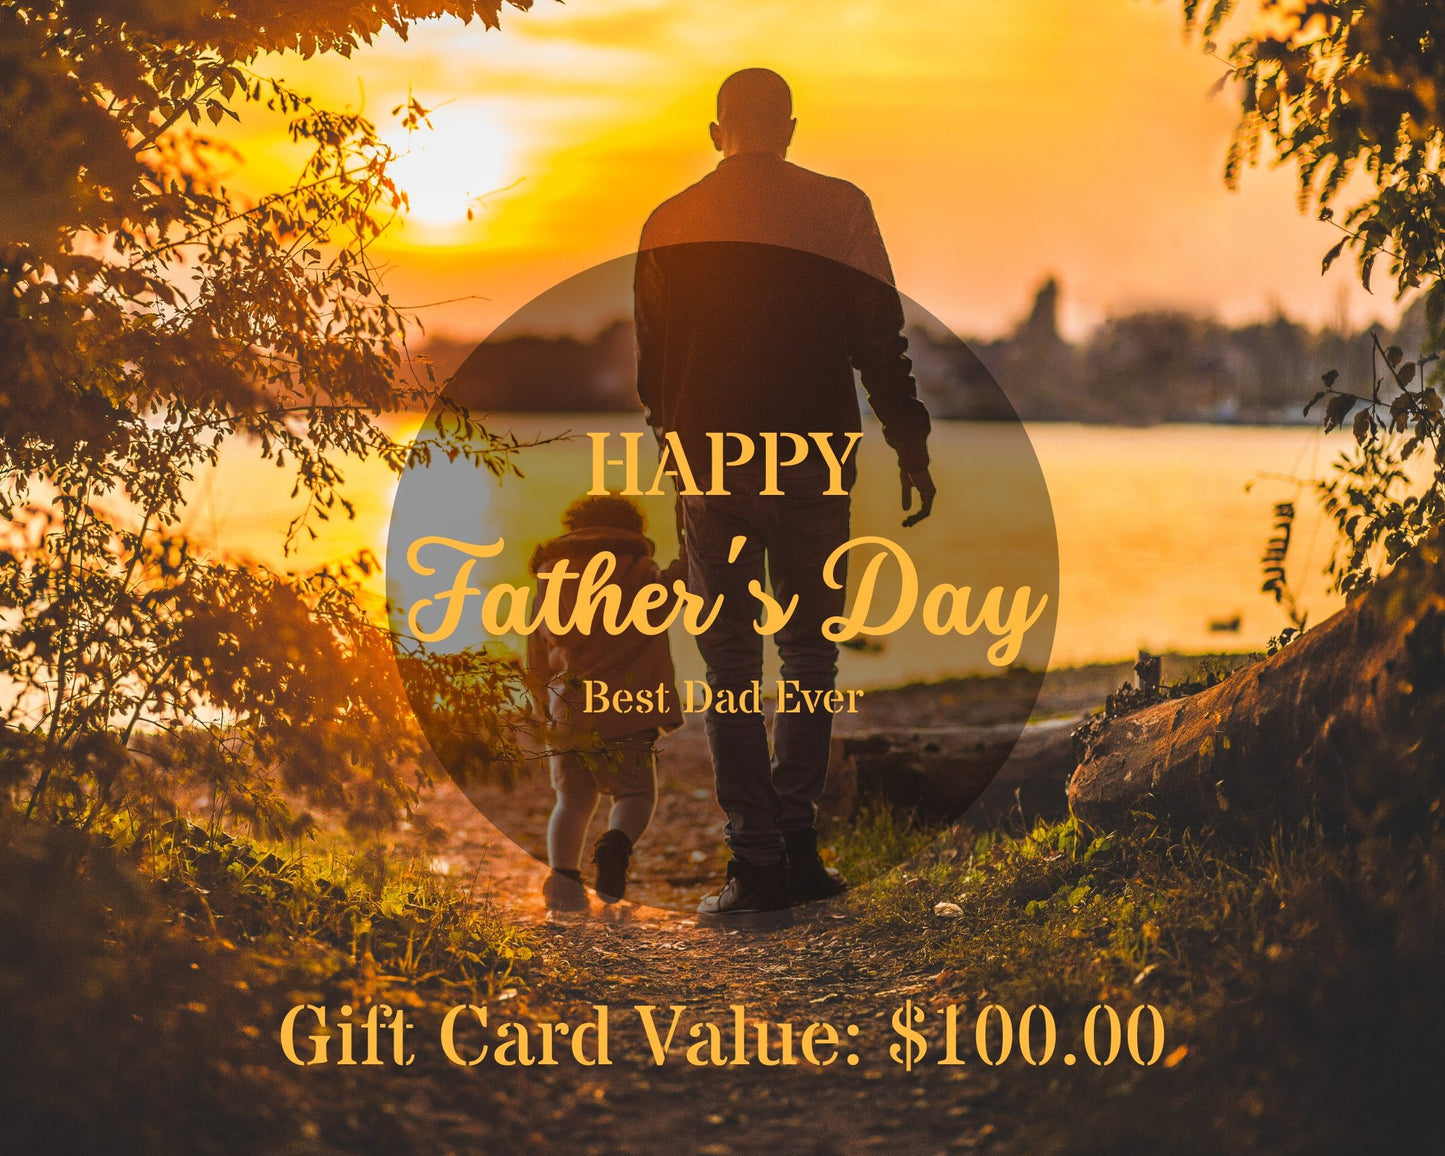 BGShop Father's Day Gift Card